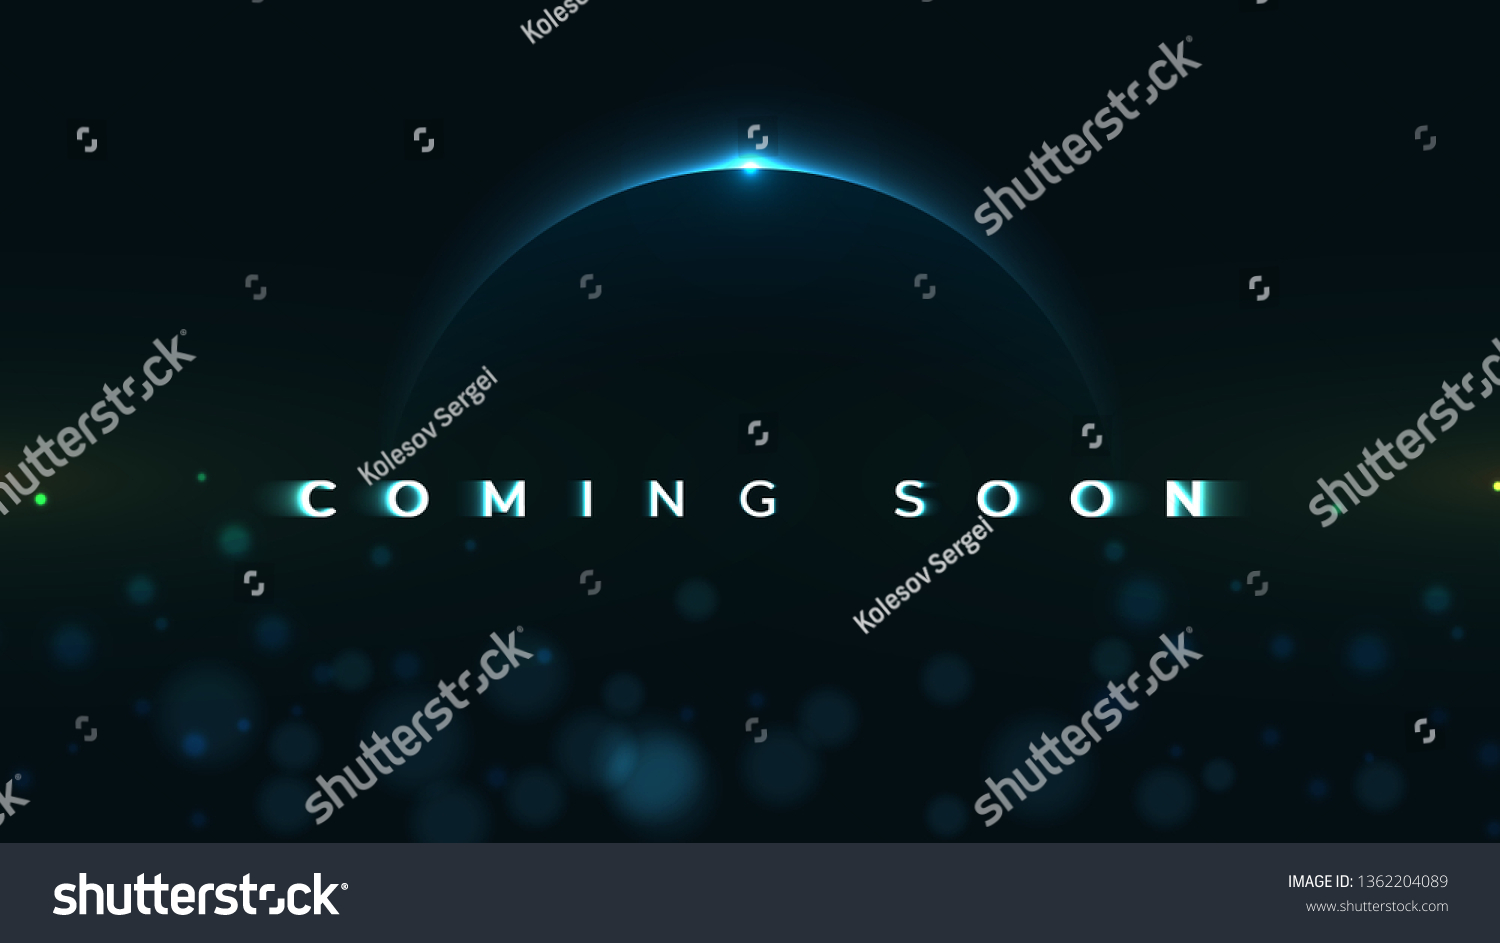 SVG of Coming Soon text on abstract Sunrise Dark Background with motion effect. Design Concept for sale, business advertising, web, promotion announce, poster, banner, flyer. - Vector Illustration svg